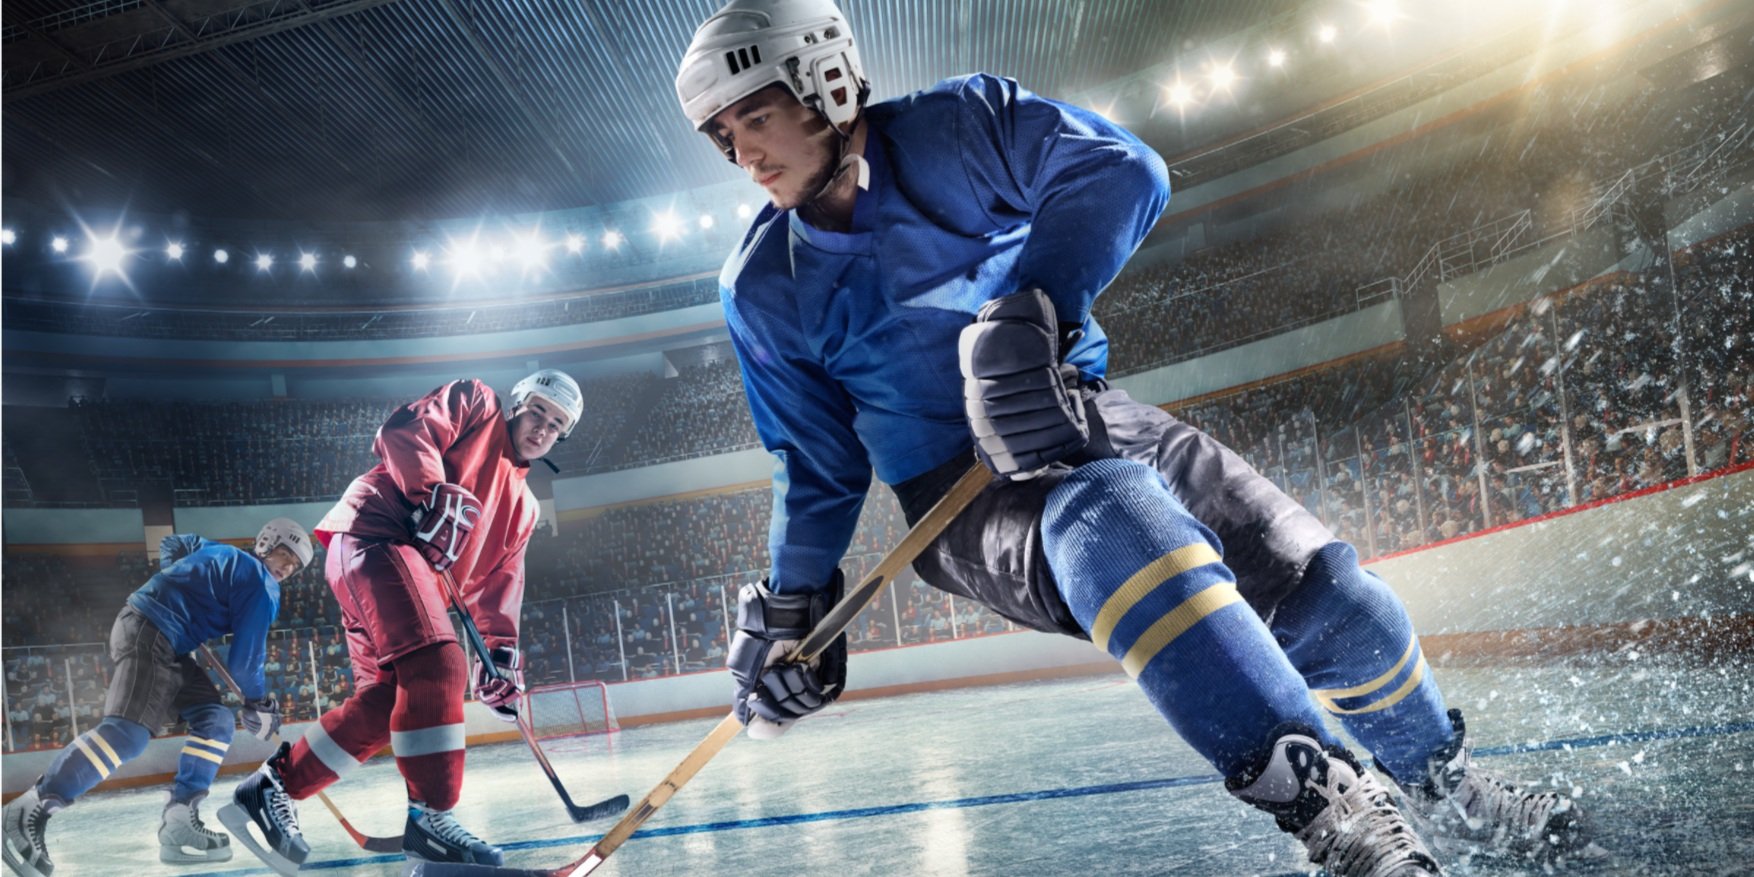 Pants Product categories  Customizable sports and safety wear, Edmonton,  Alberta